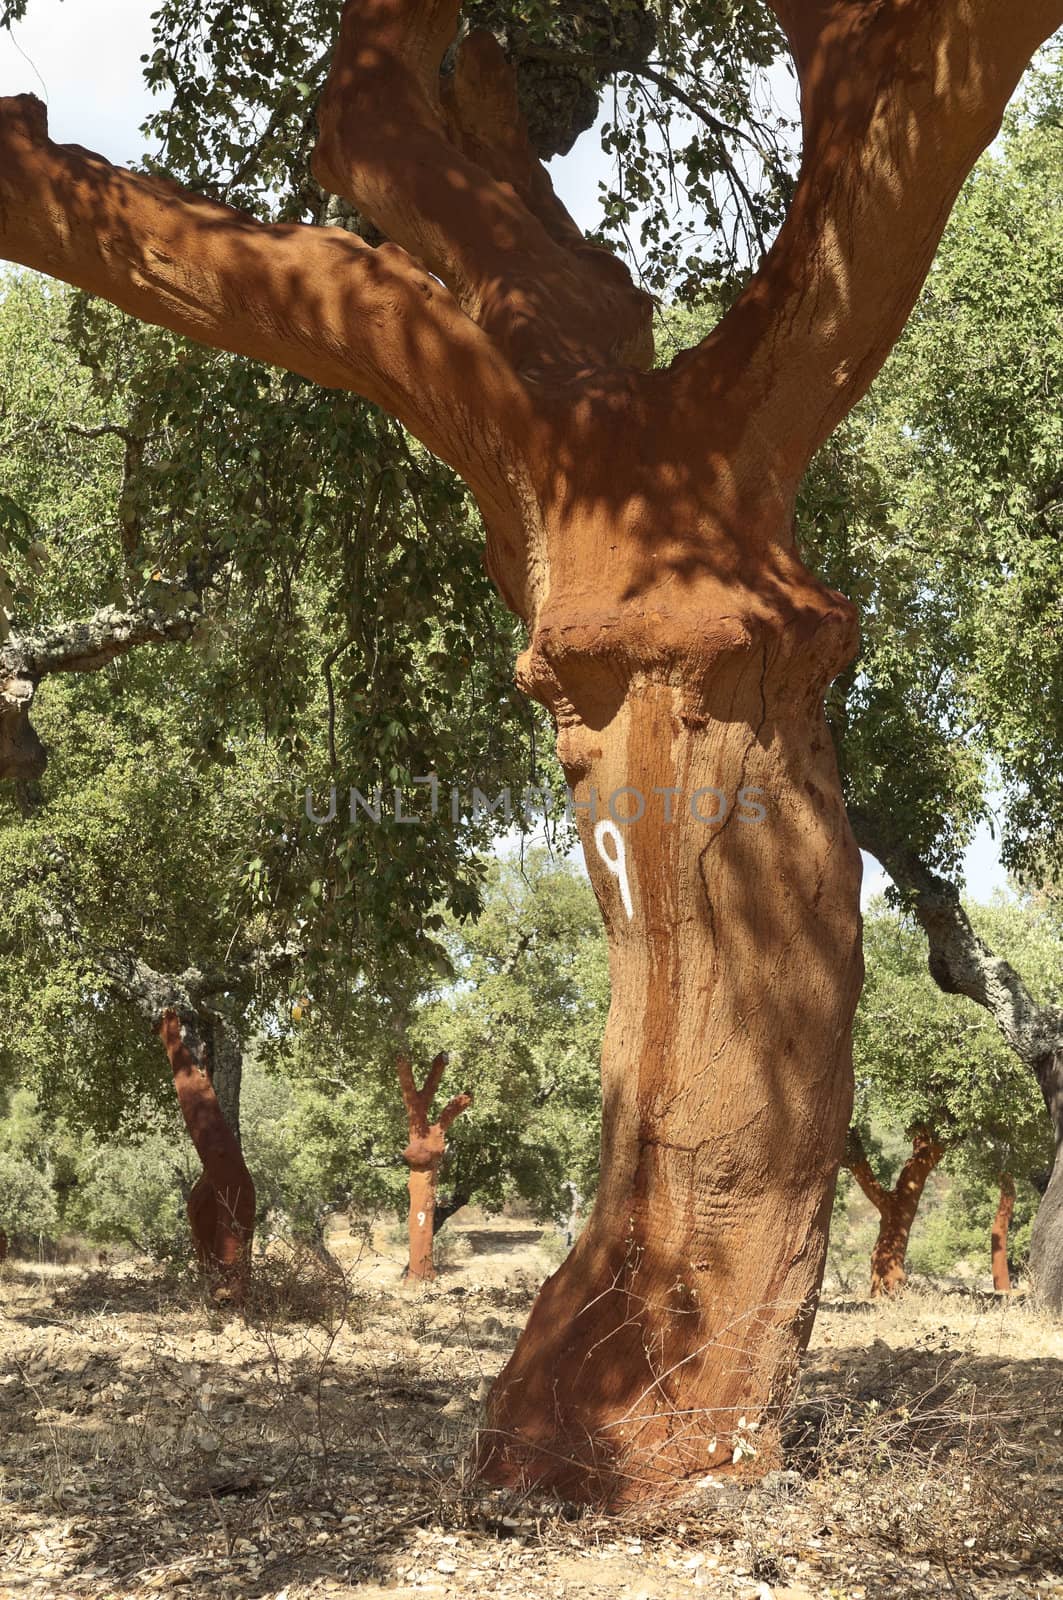 Cork trees - quercus suber - recently stripped, Alentejo, Portugal